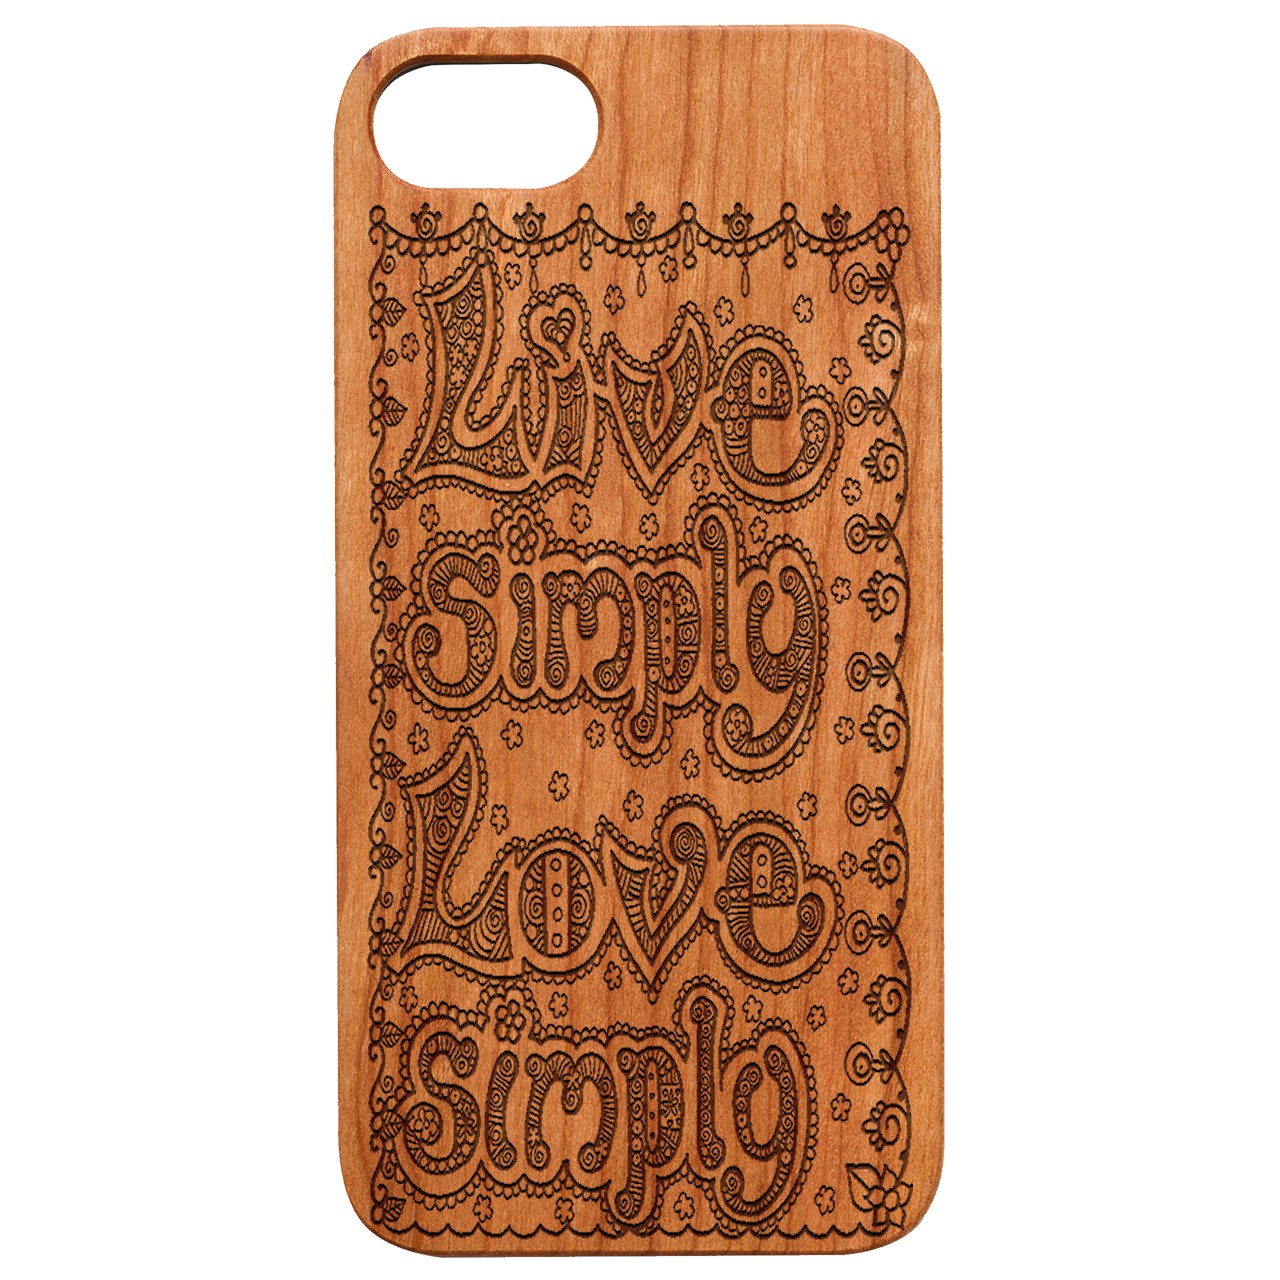  Live Simply - Engraved - Wooden Phone Case - IPhone 13 Models